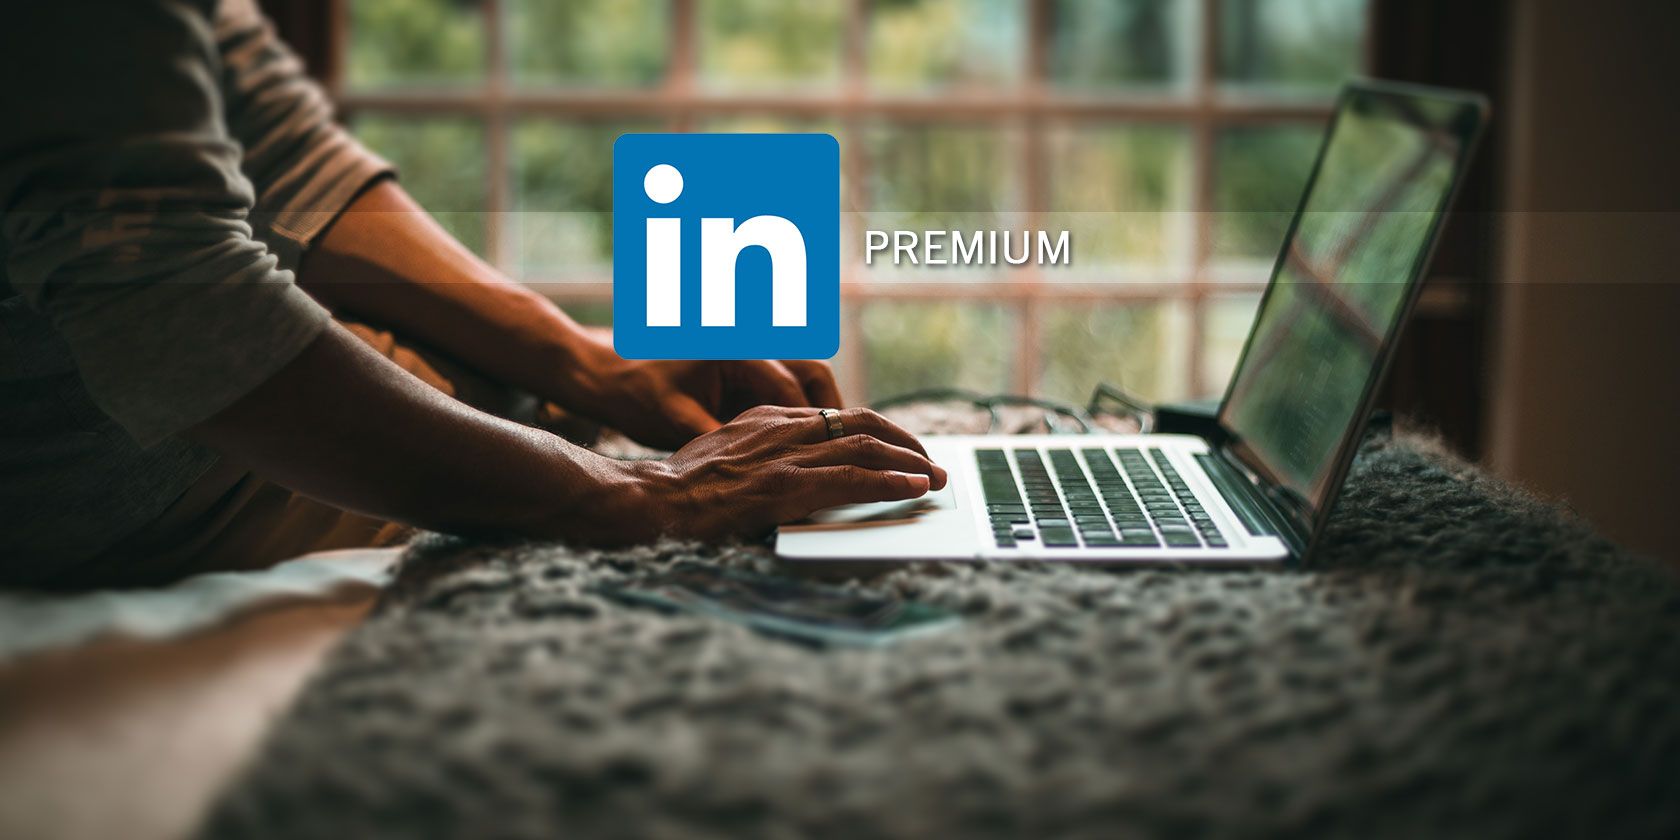 Is LinkedIn Premium Worth Paying For? 3 Things to Consider